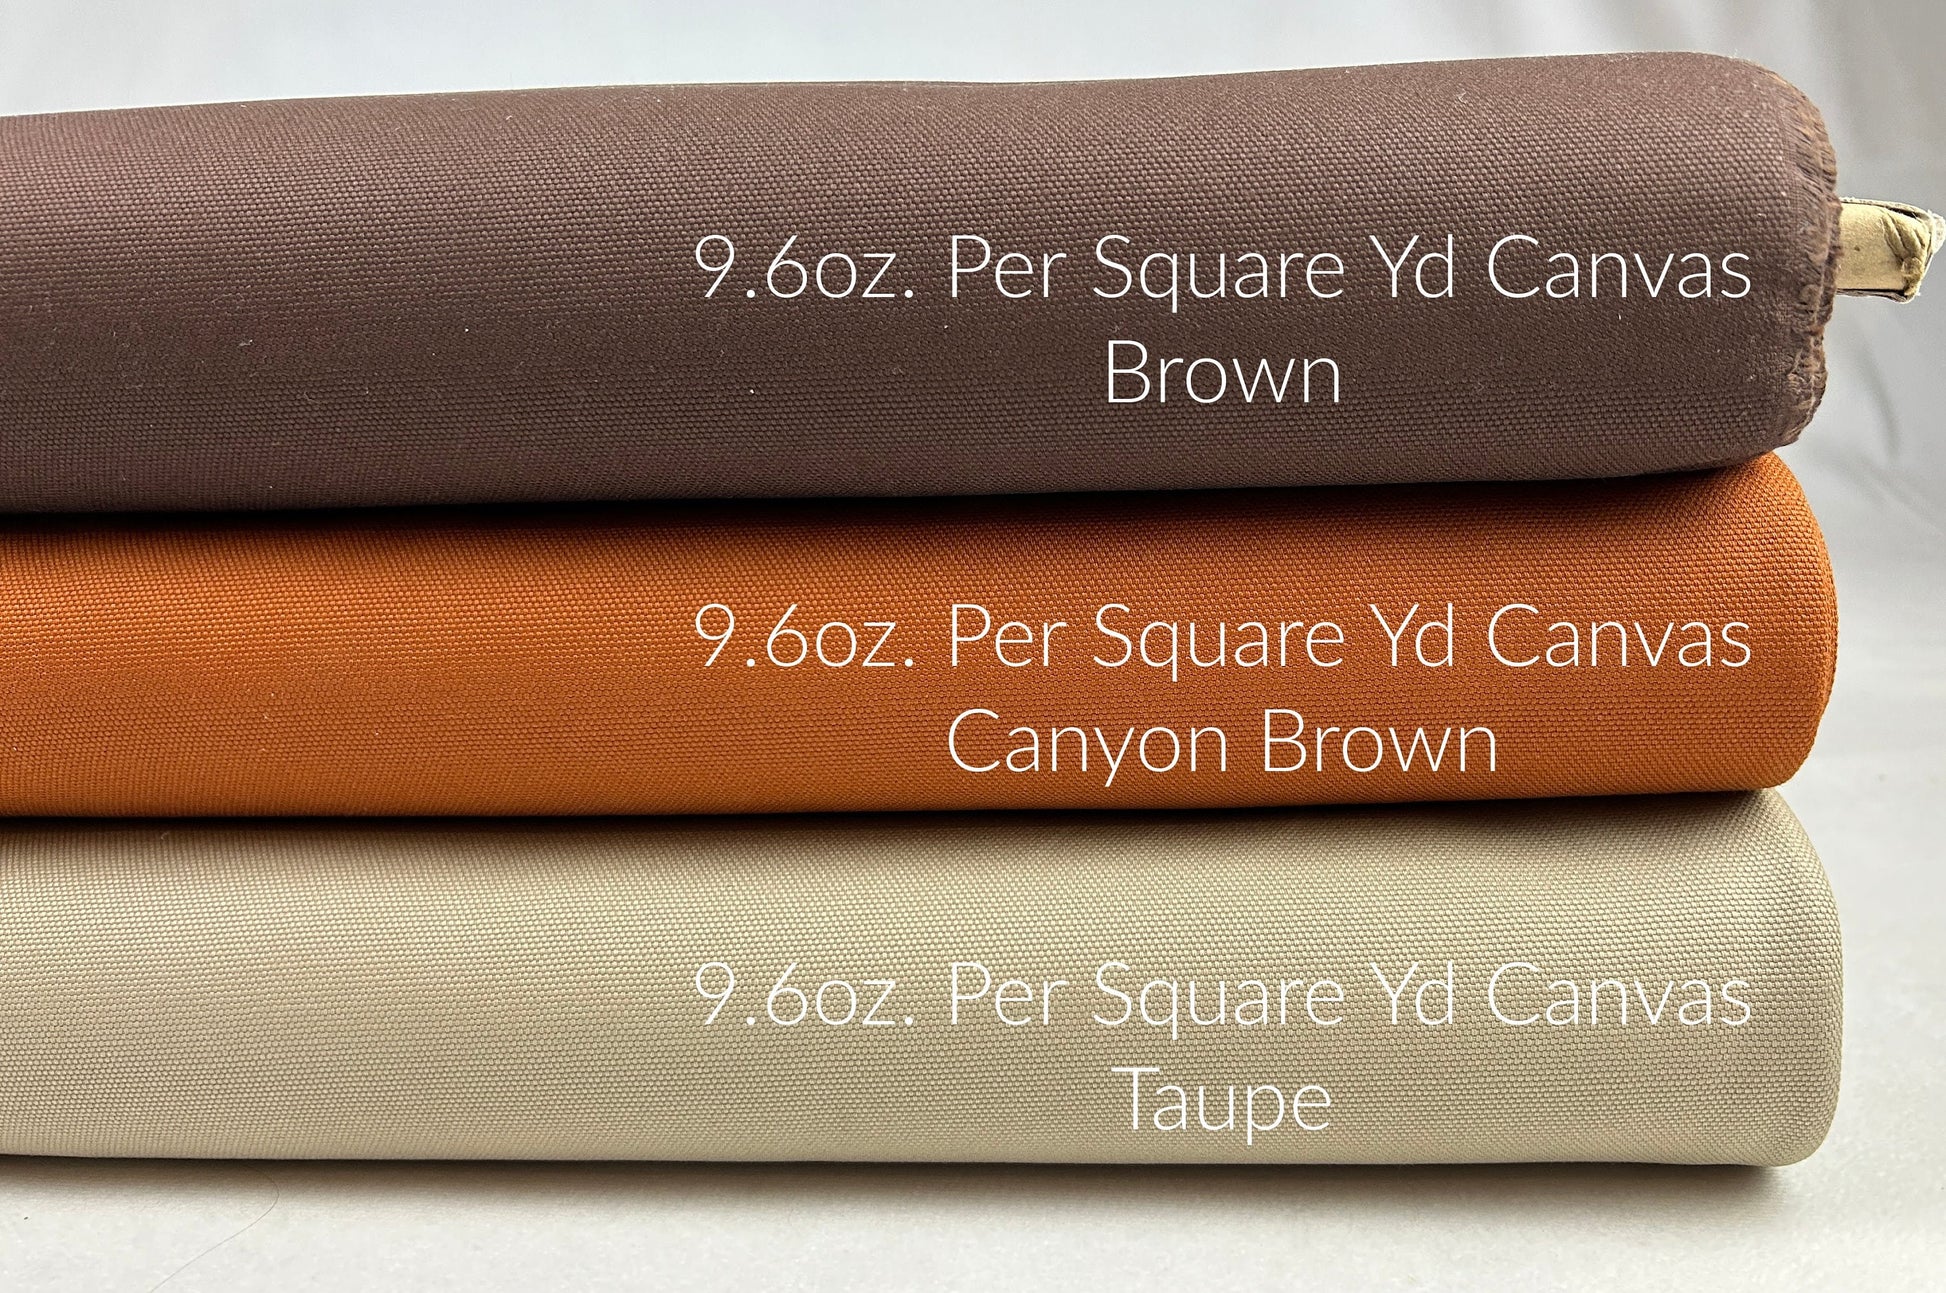 Big Sur Canvas Brown Canyon Brown taupe fabric fetish